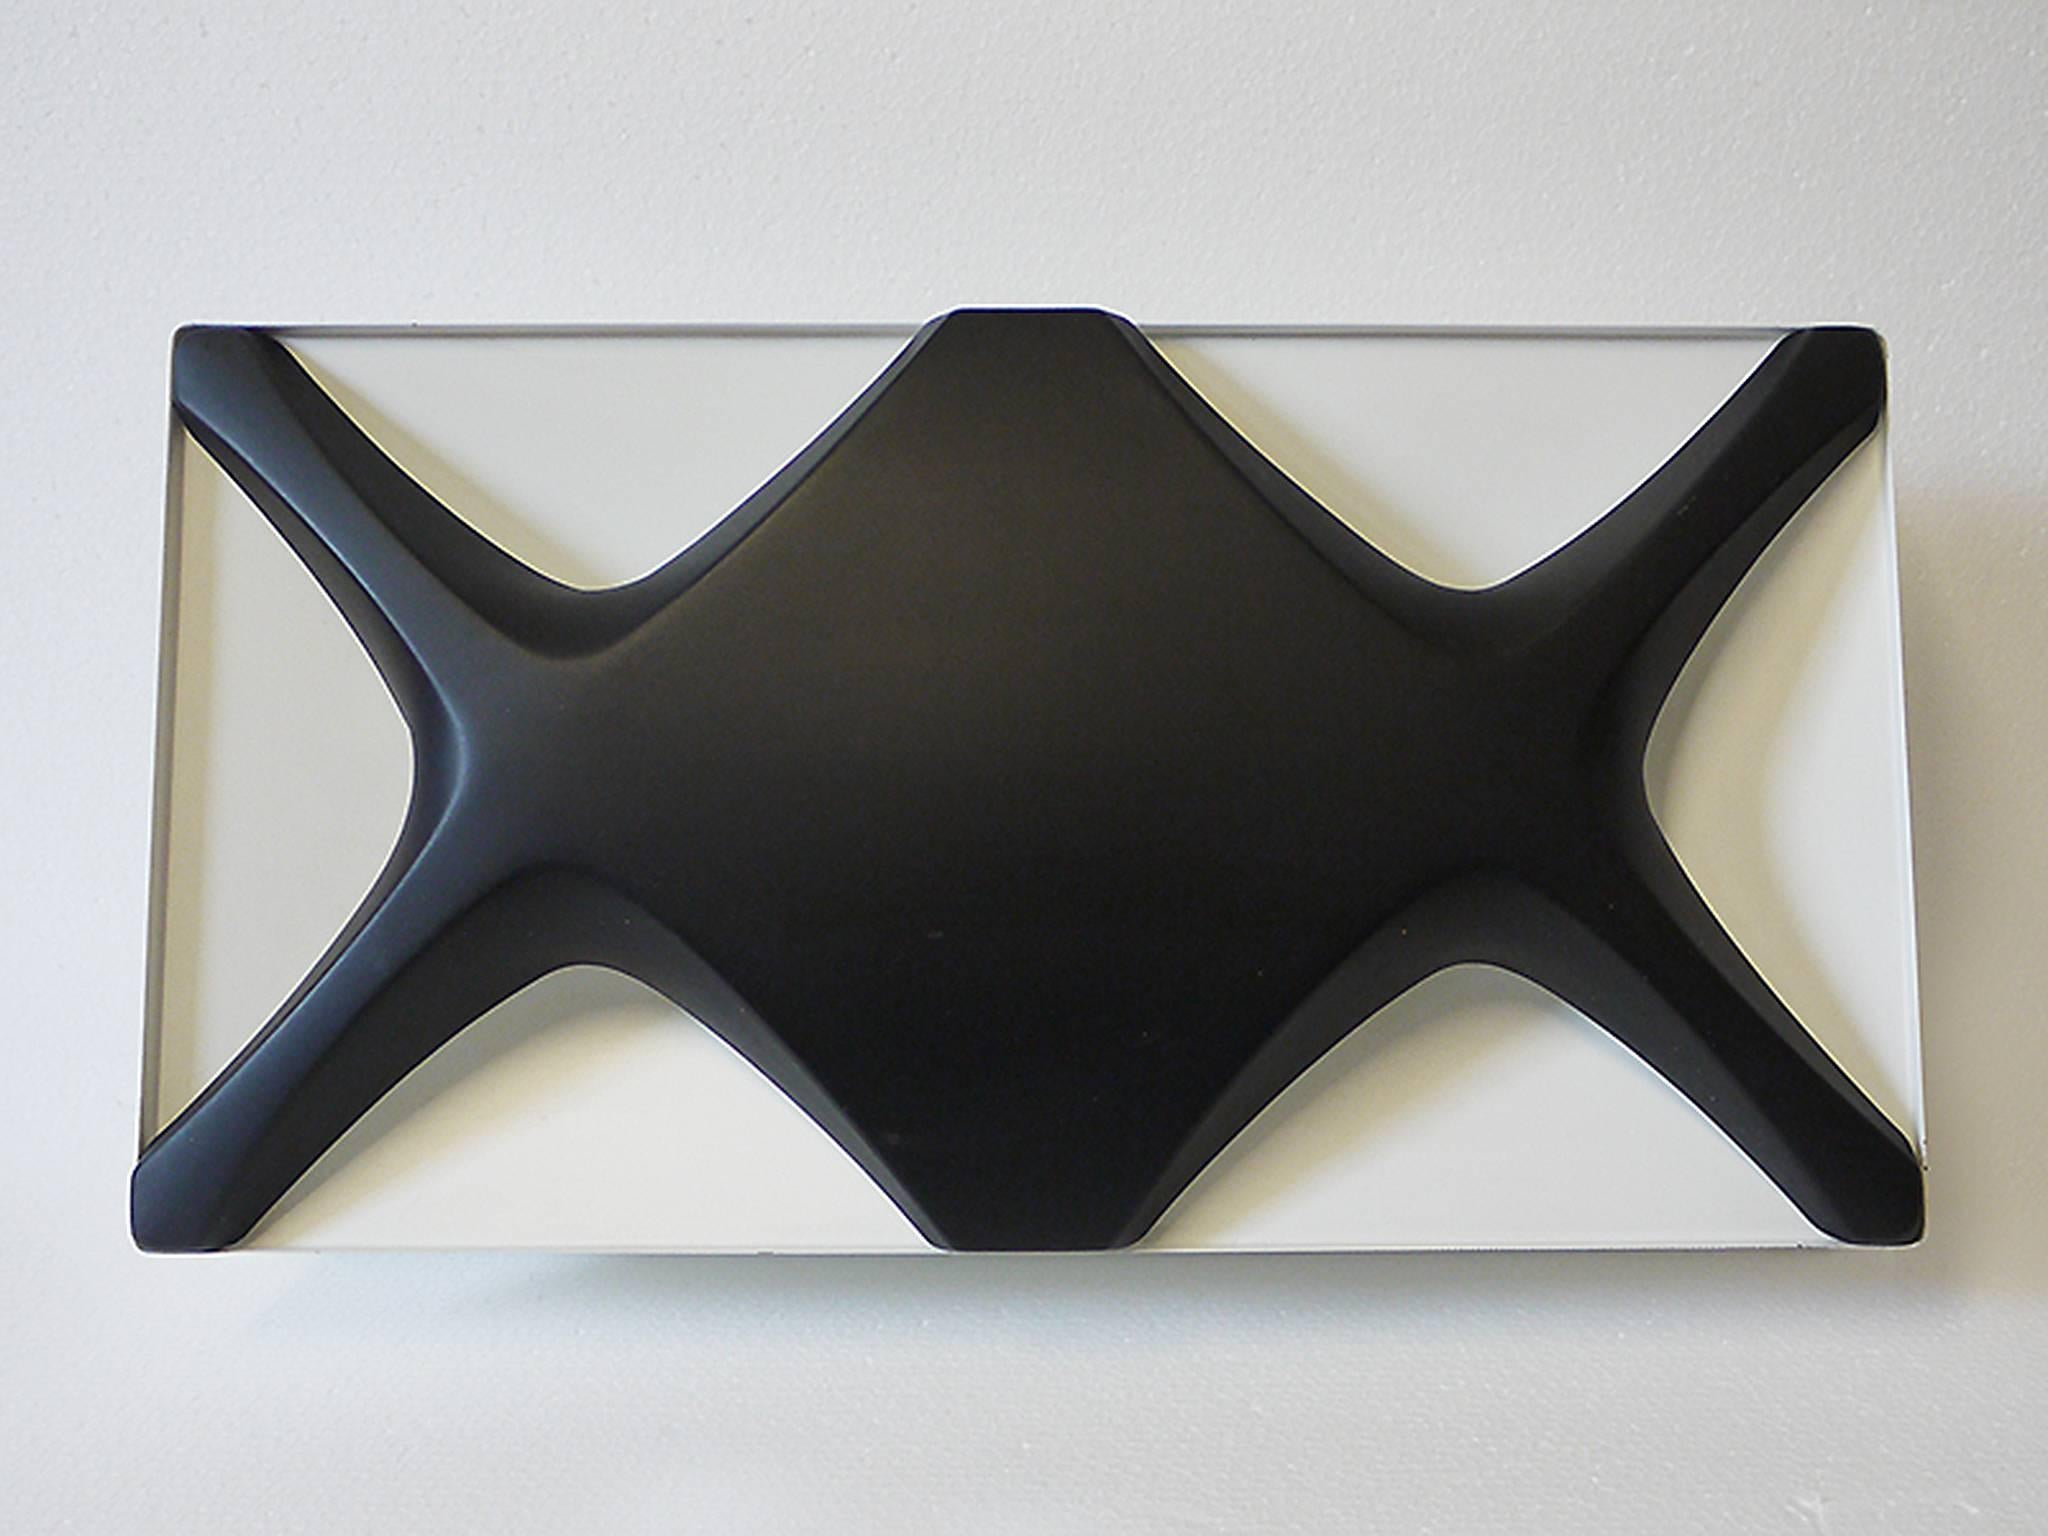 Space Age Large Oyster Light Panel by Dieter Witte & Rolf Krüger for Staff, 1968